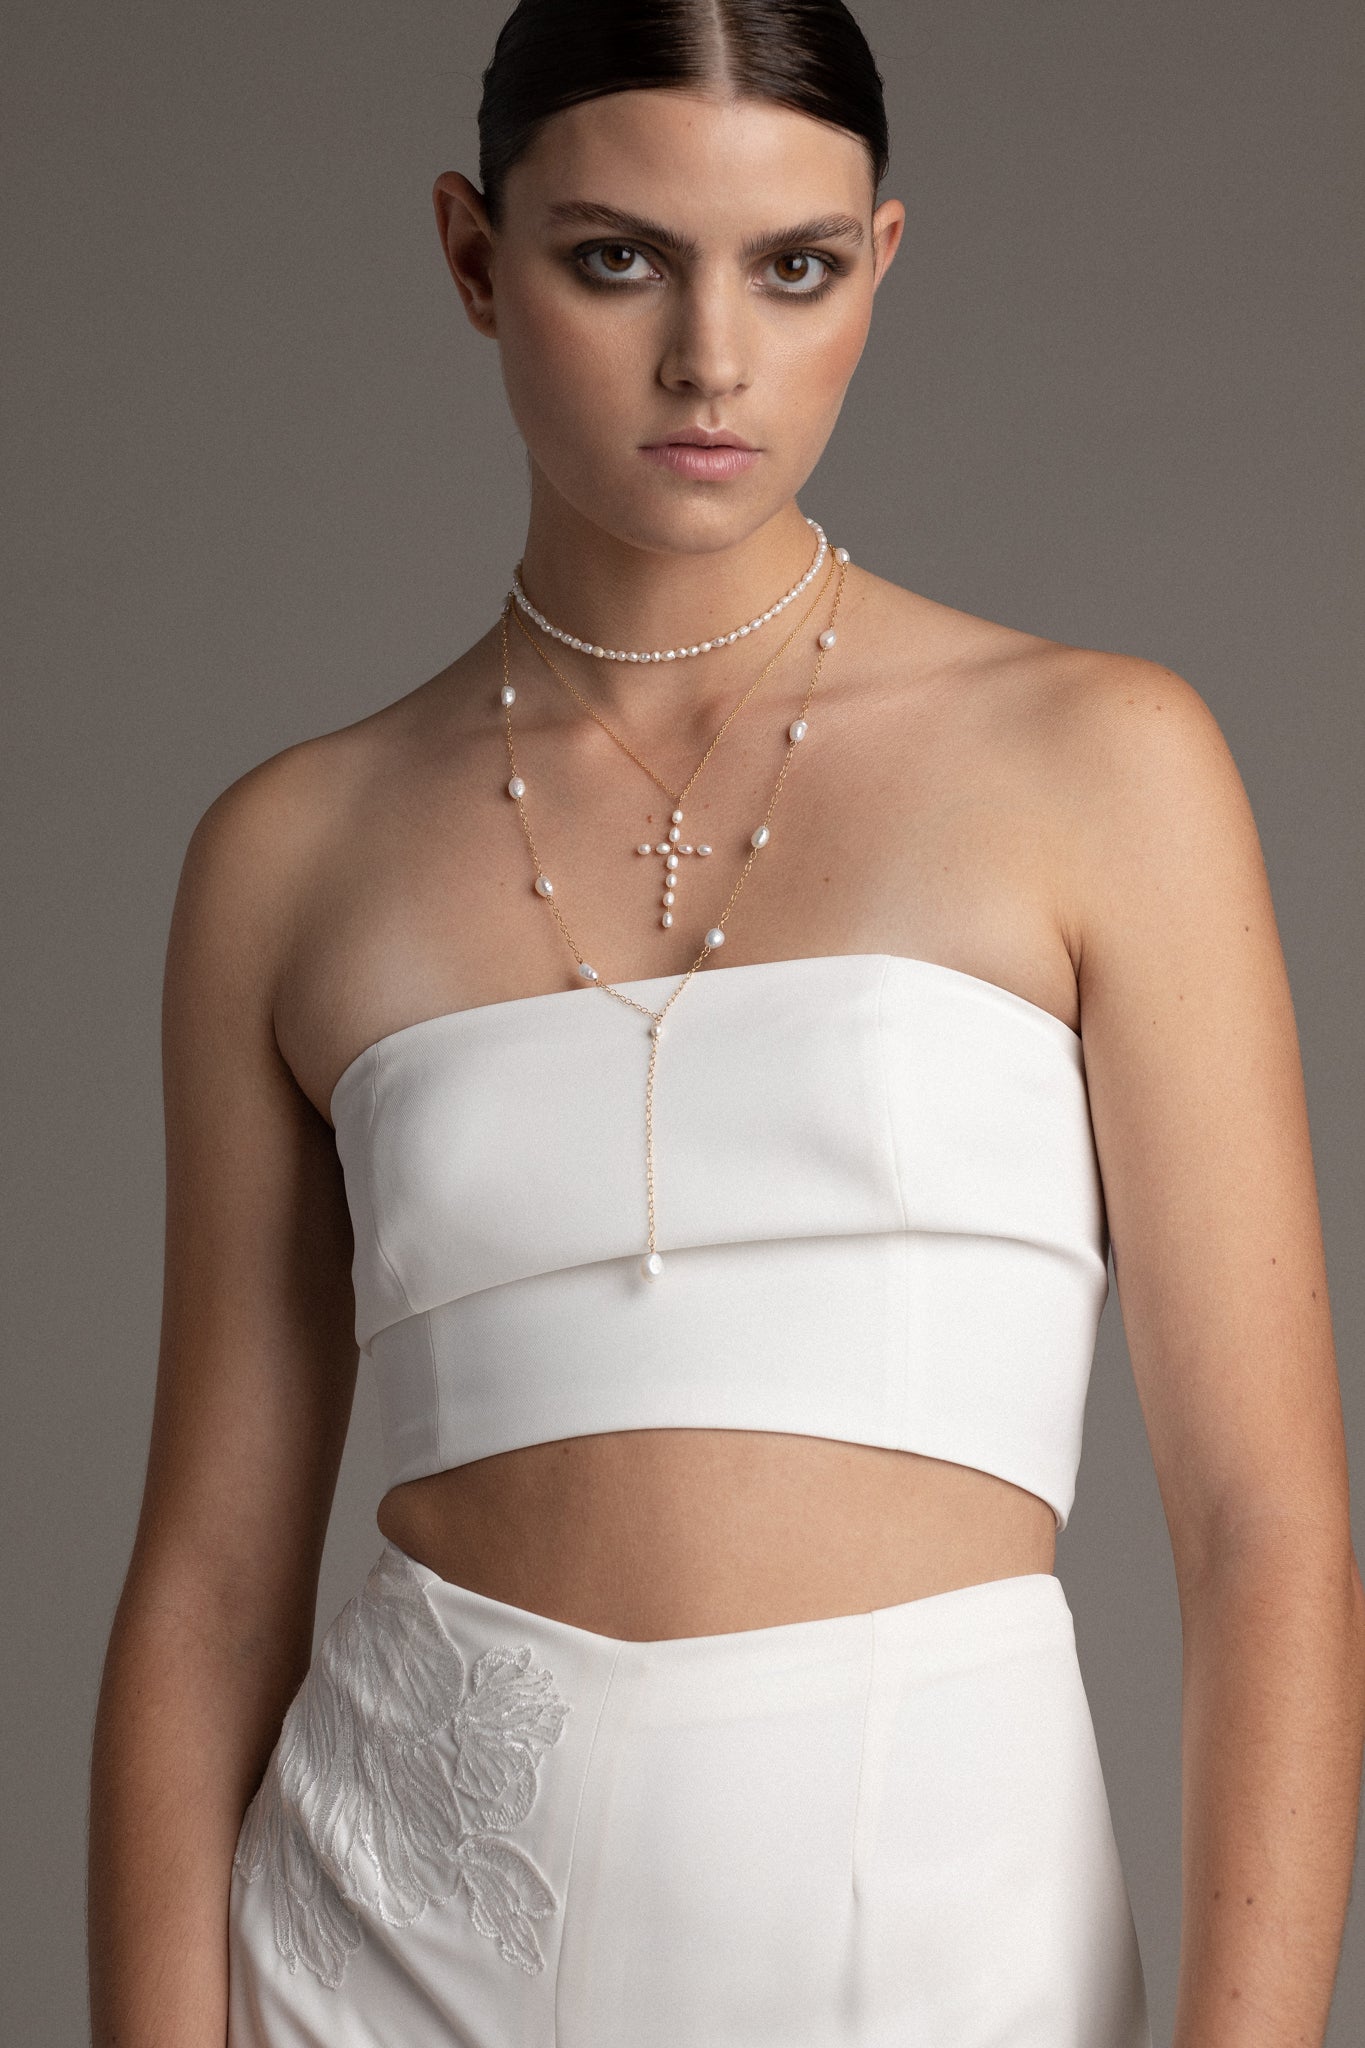 This necklace features a captivating arrangement of freshwater pearls delicately strung along the chain. 